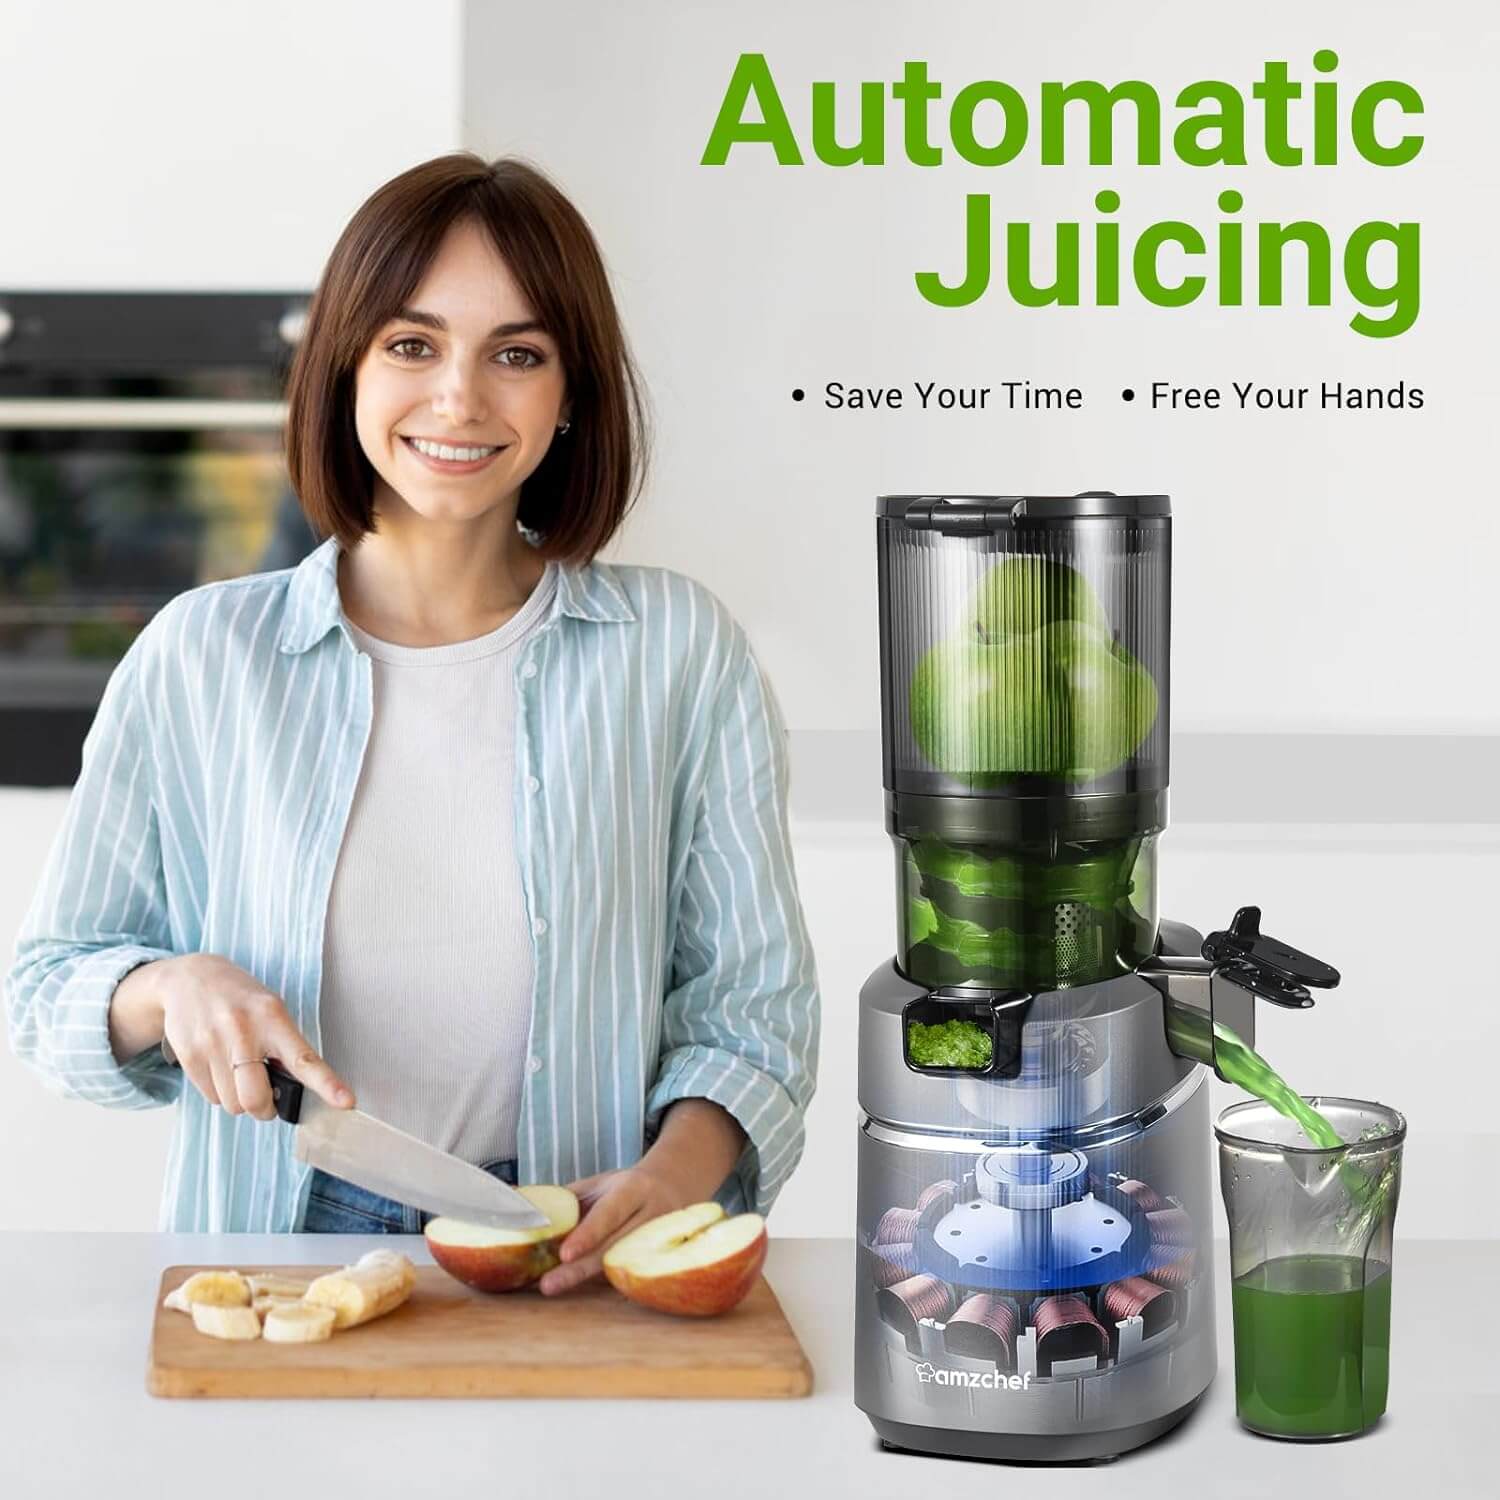 AMZCHEF Masticating Juicer 5.3-Inch Self-Feeding Fit Whole Fruits & Vegetables